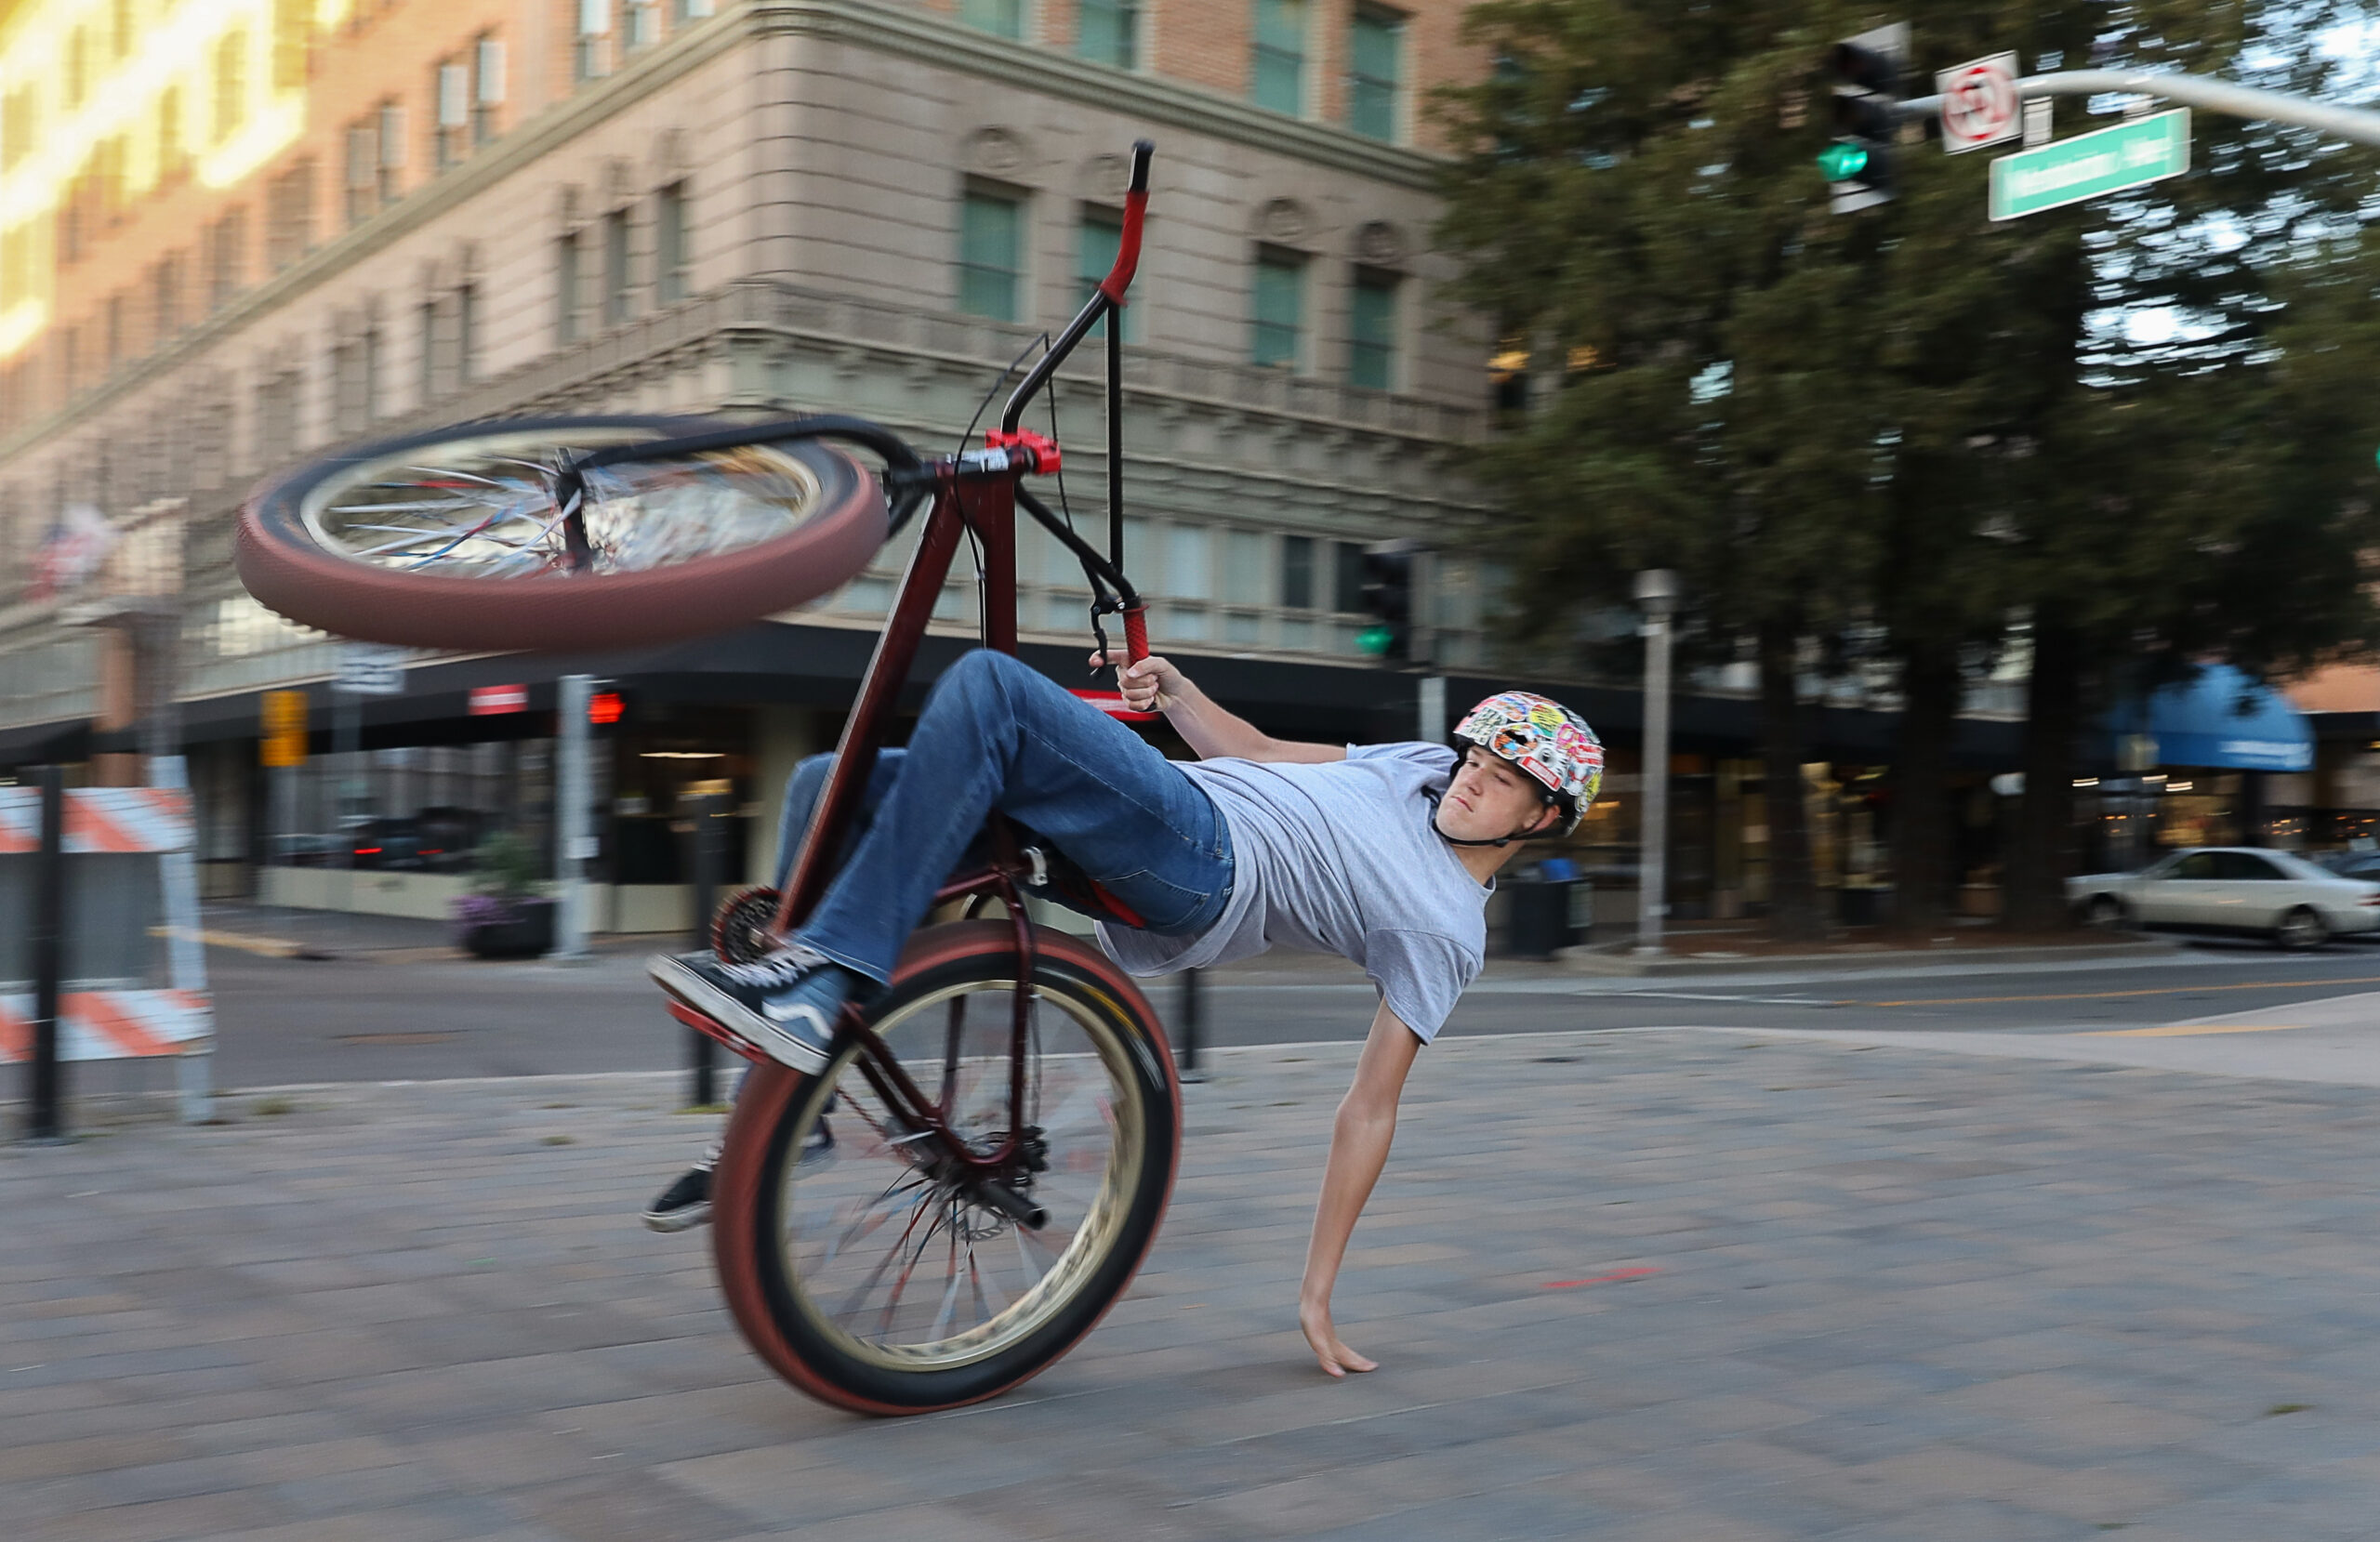 Devan Tucker leans back to touch the ground while performing a wheelie on his bike at Old Courthouse Square in Santa Rosa on Thursday, March 4, 2021. (Christopher Chung/ The Press Democrat)